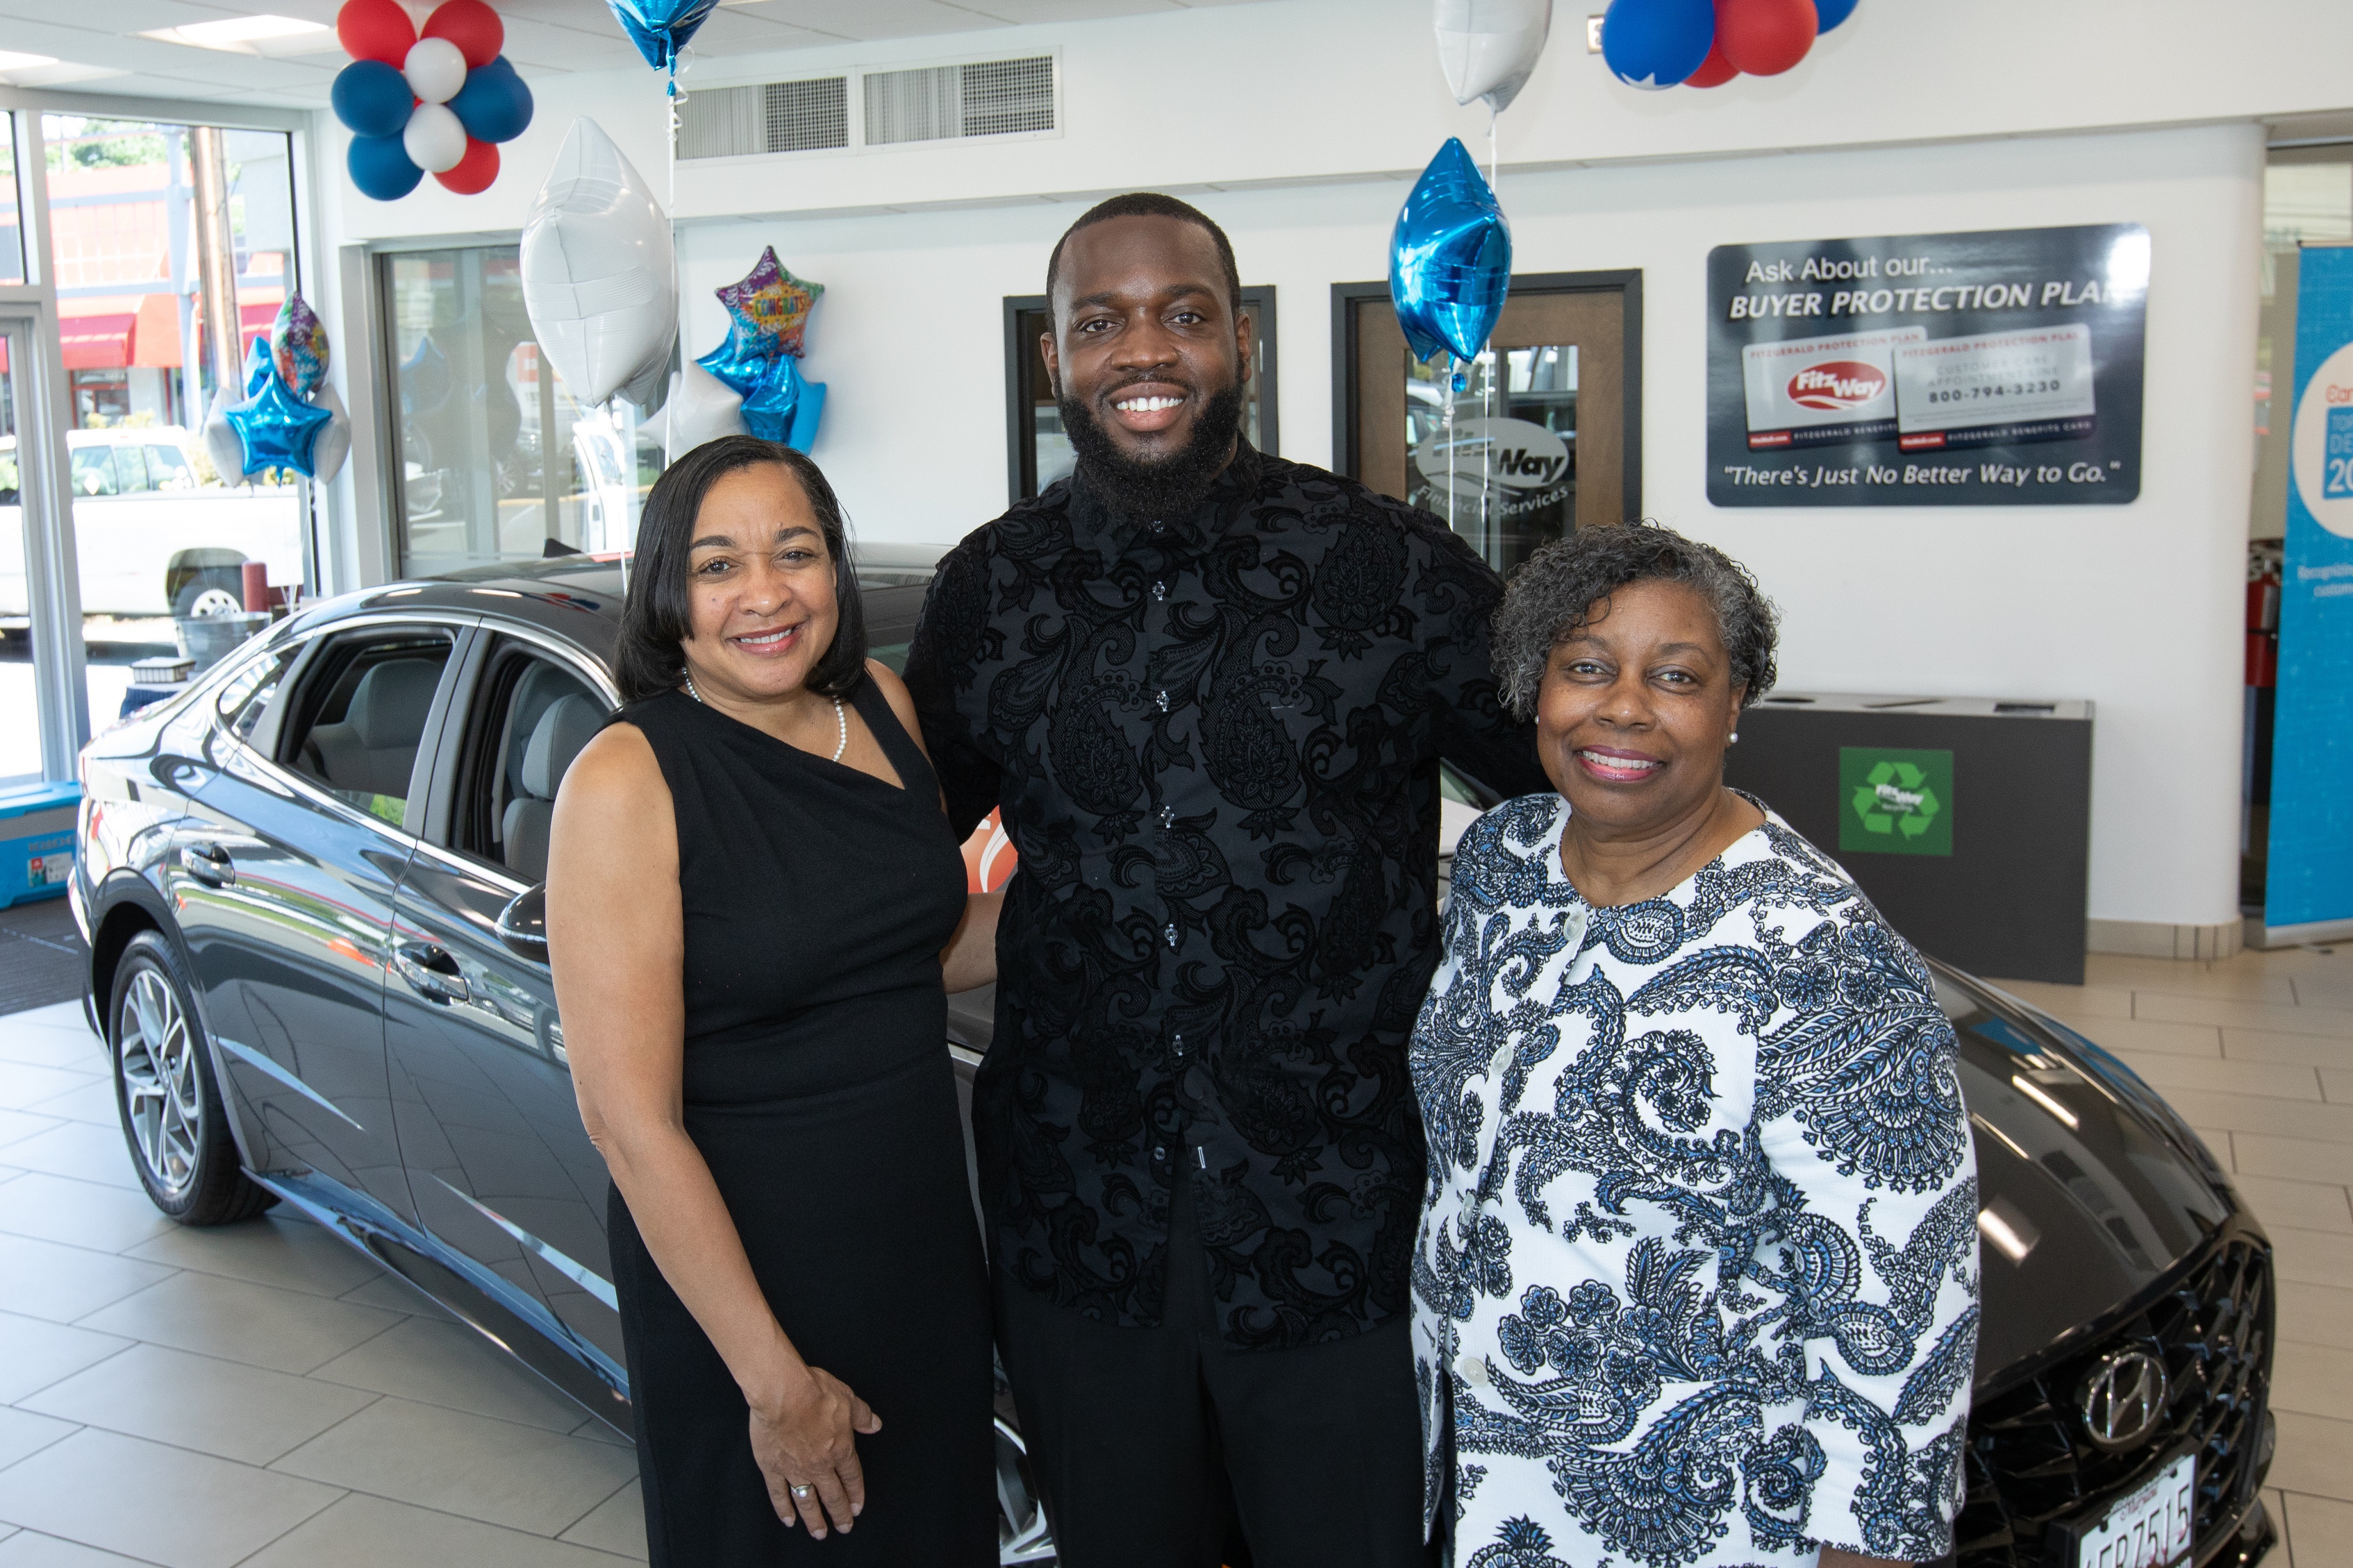 2021 Teacher of the Year Joseph Bostic Jr. with Foundation Executive Director Yolanda Johnson Pruitt (right) and his wife (left)